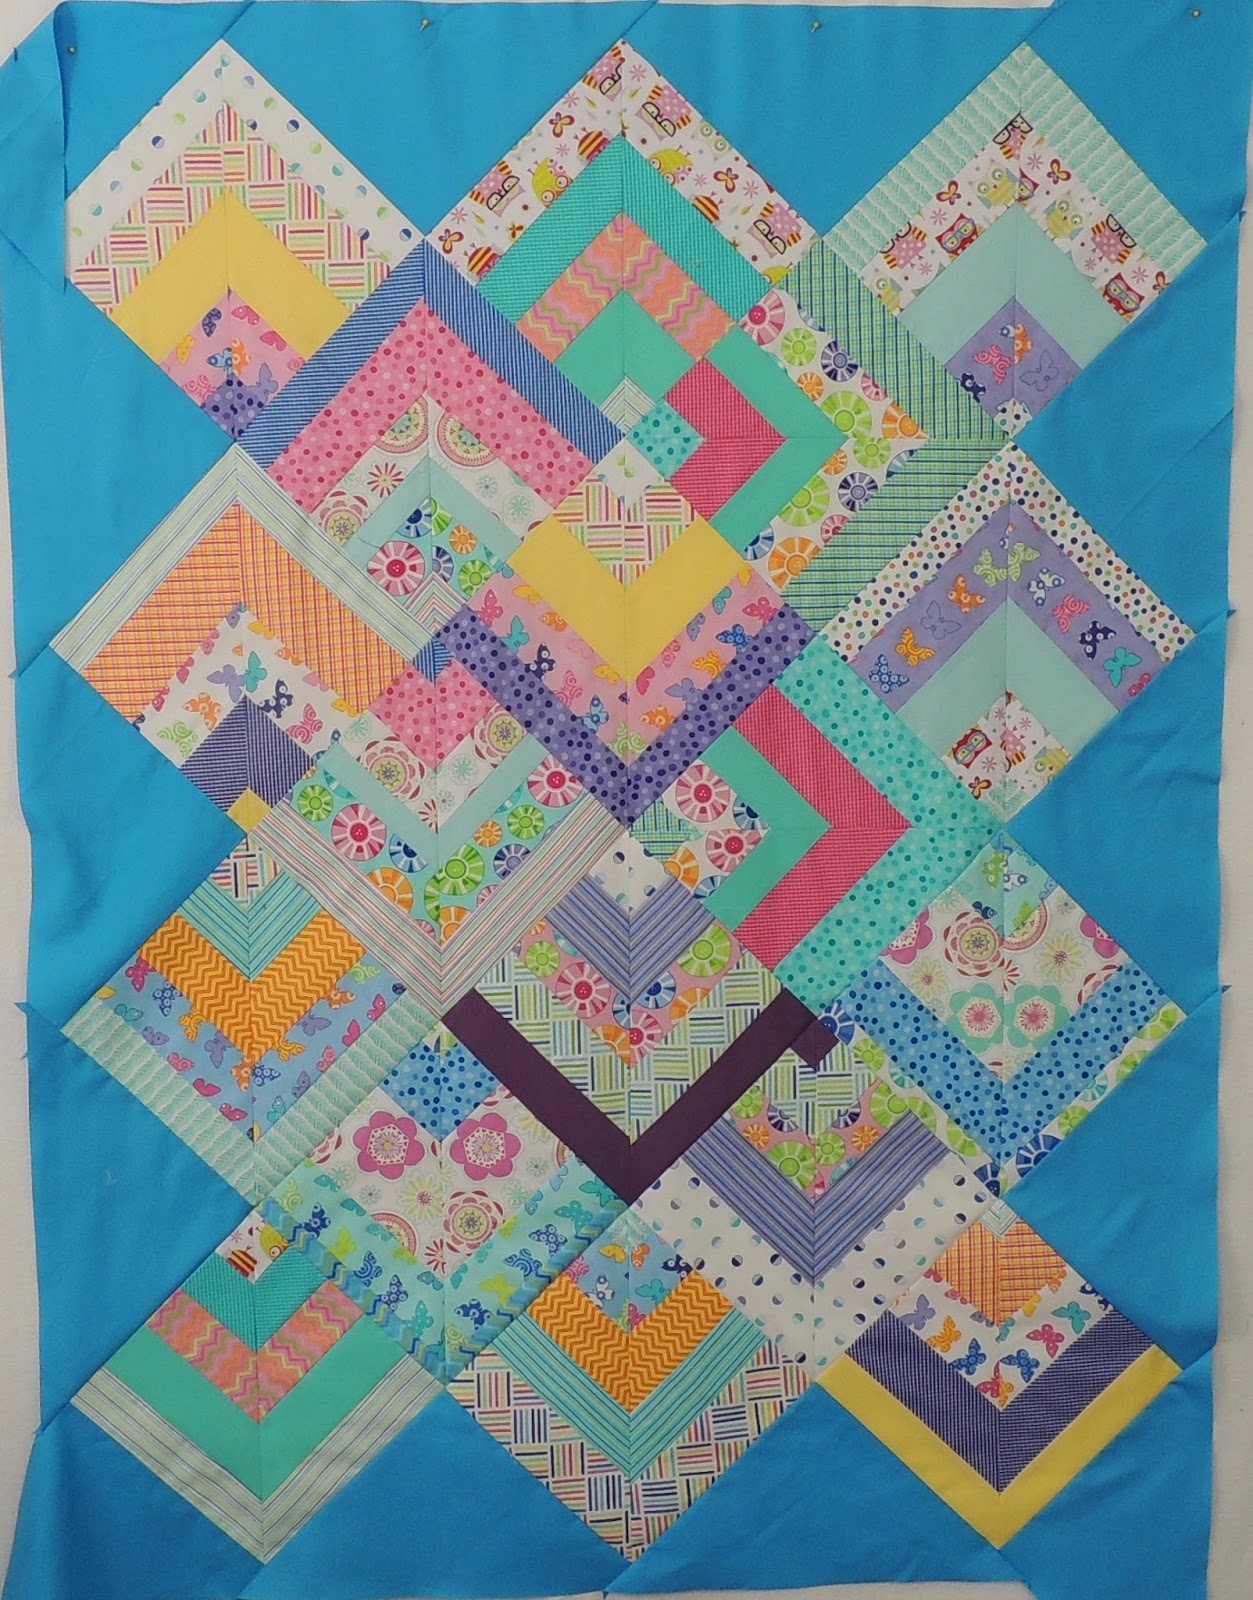 Cspoonquilt: Charitable Quilts